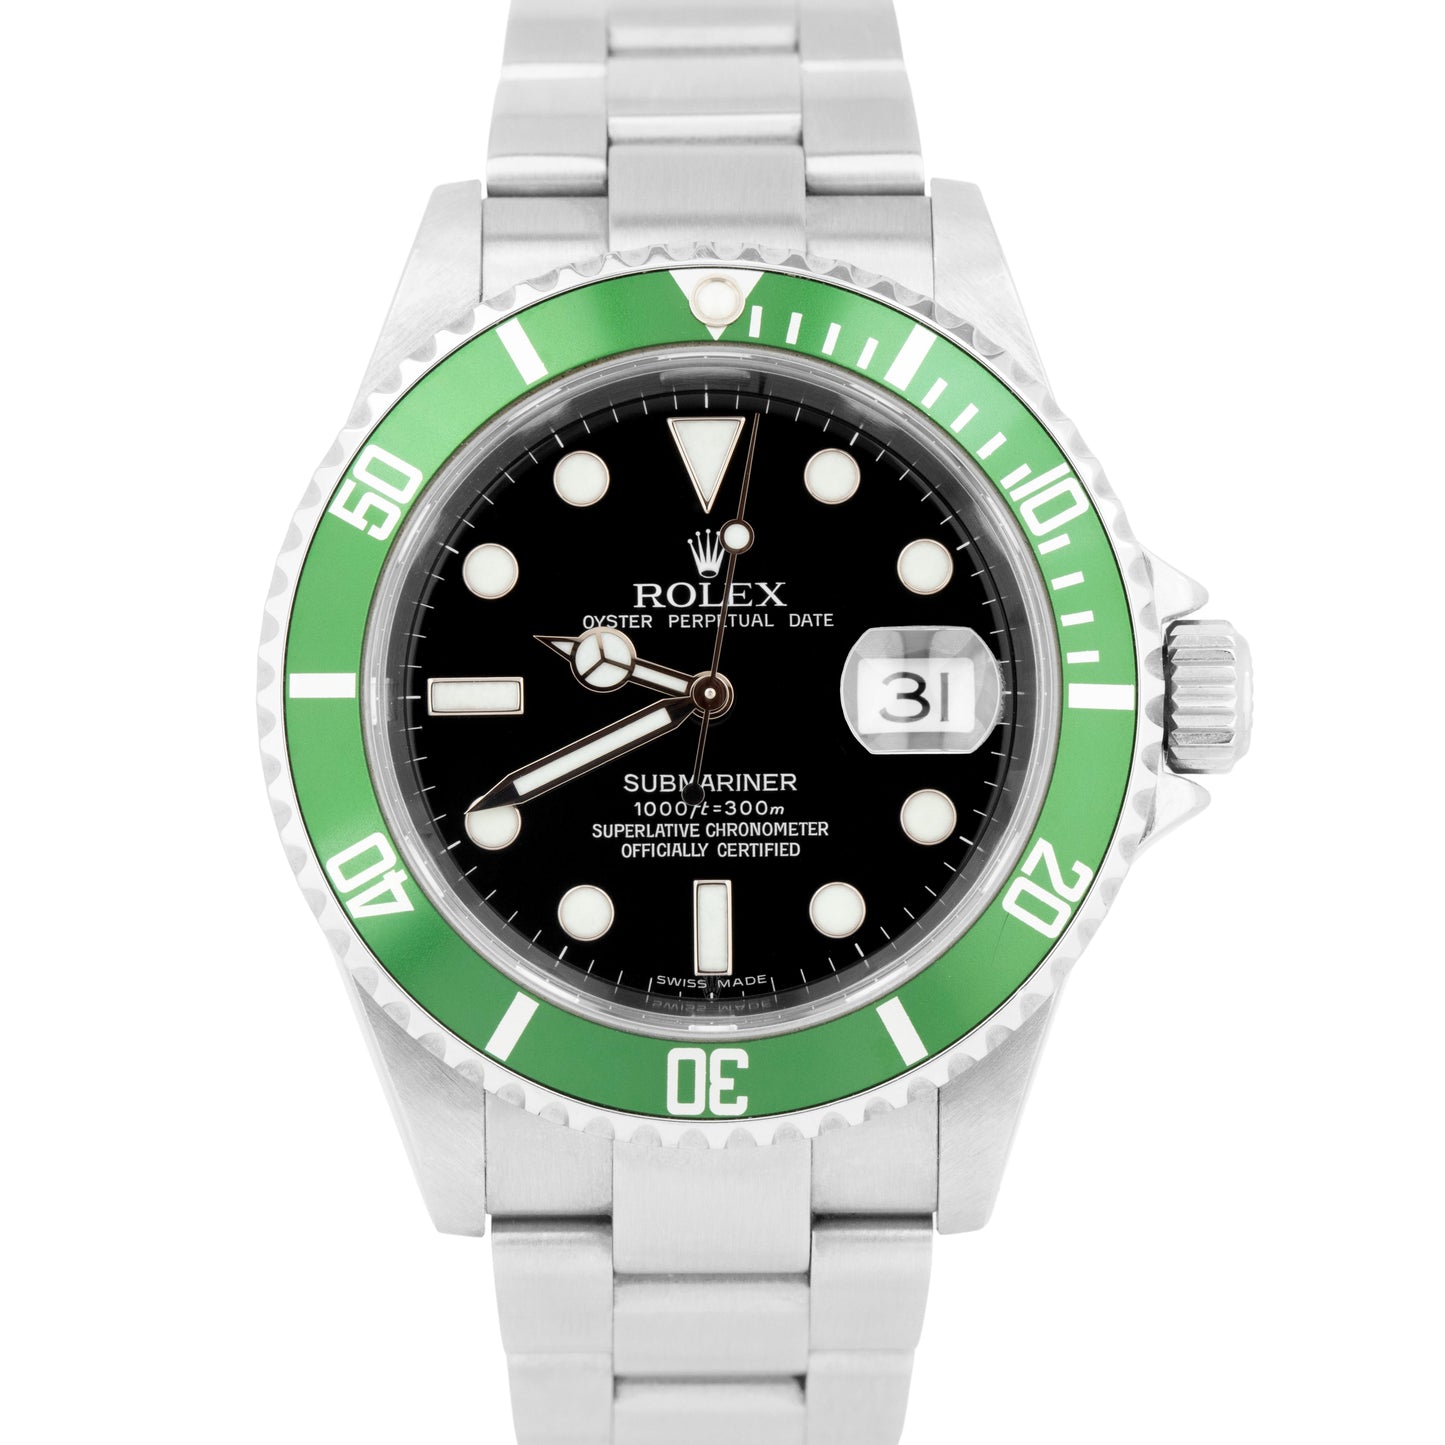 2007 PAPERS Rolex Submariner Date KERMIT Green Stainless Watch 16610 LV B+P